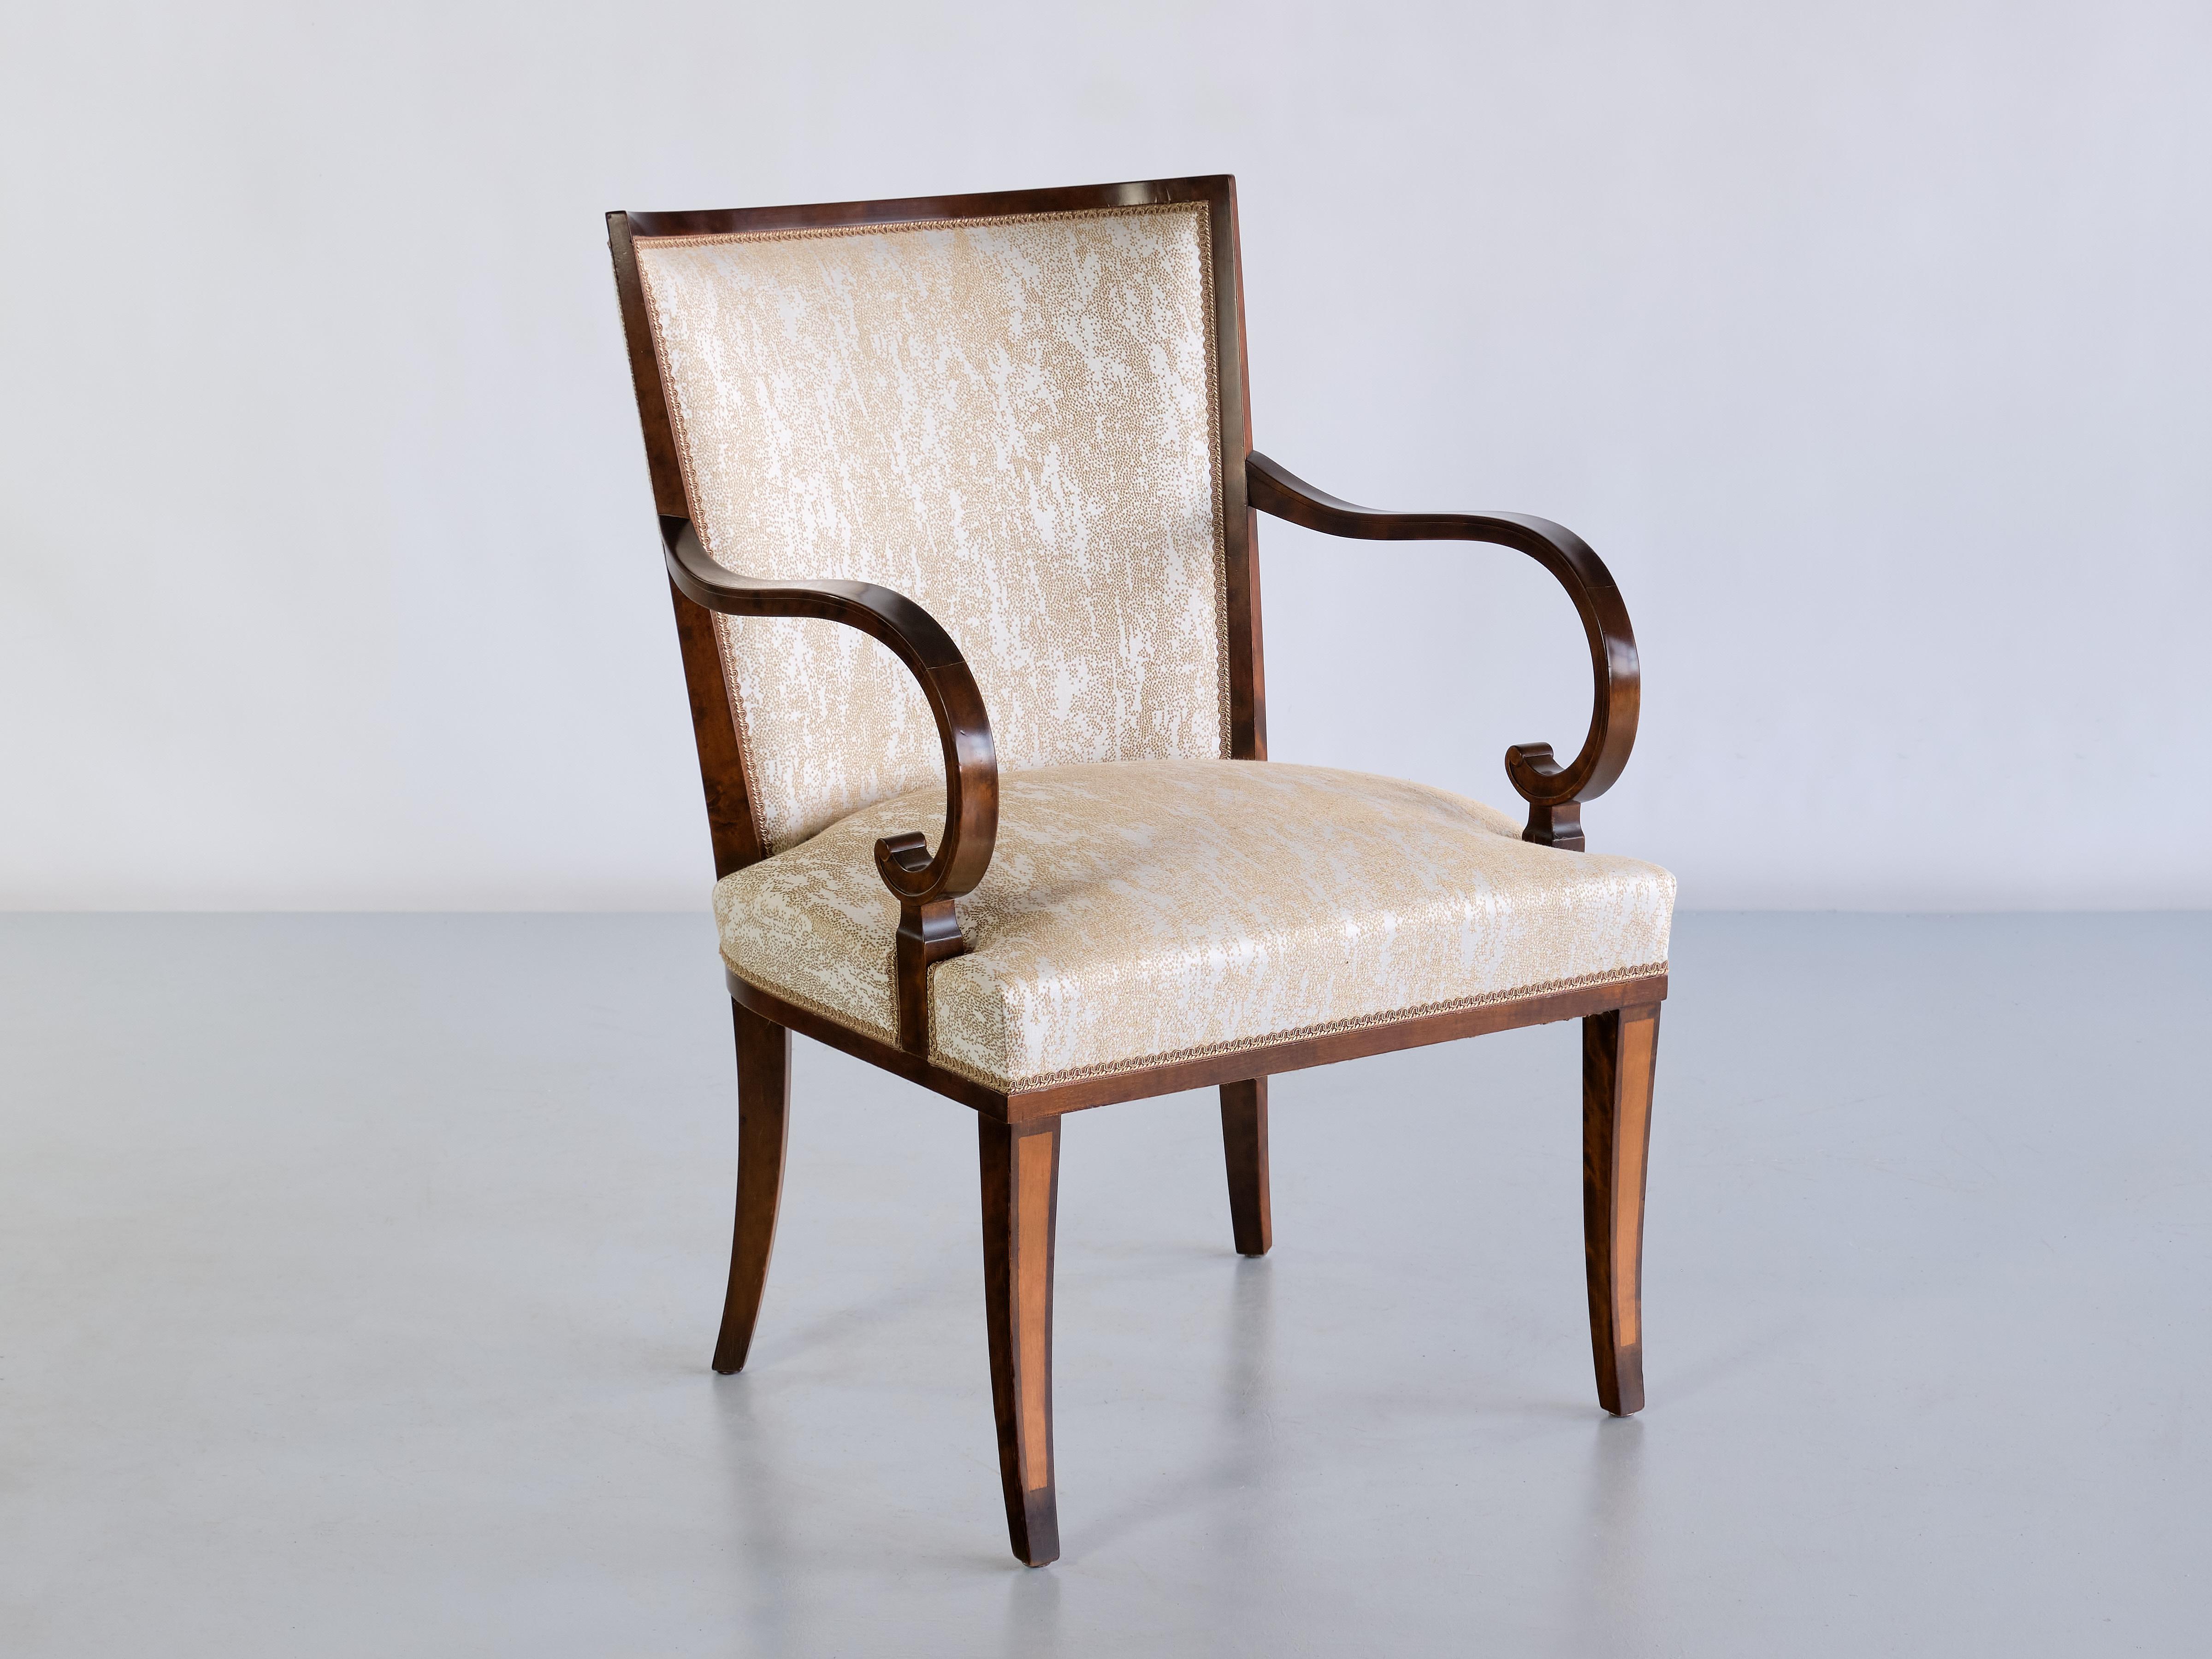 Scandinavian Modern Pair of Carl Malmsten Armchairs in Birch and Satinwood, Bodafors, Sweden, 1930s For Sale